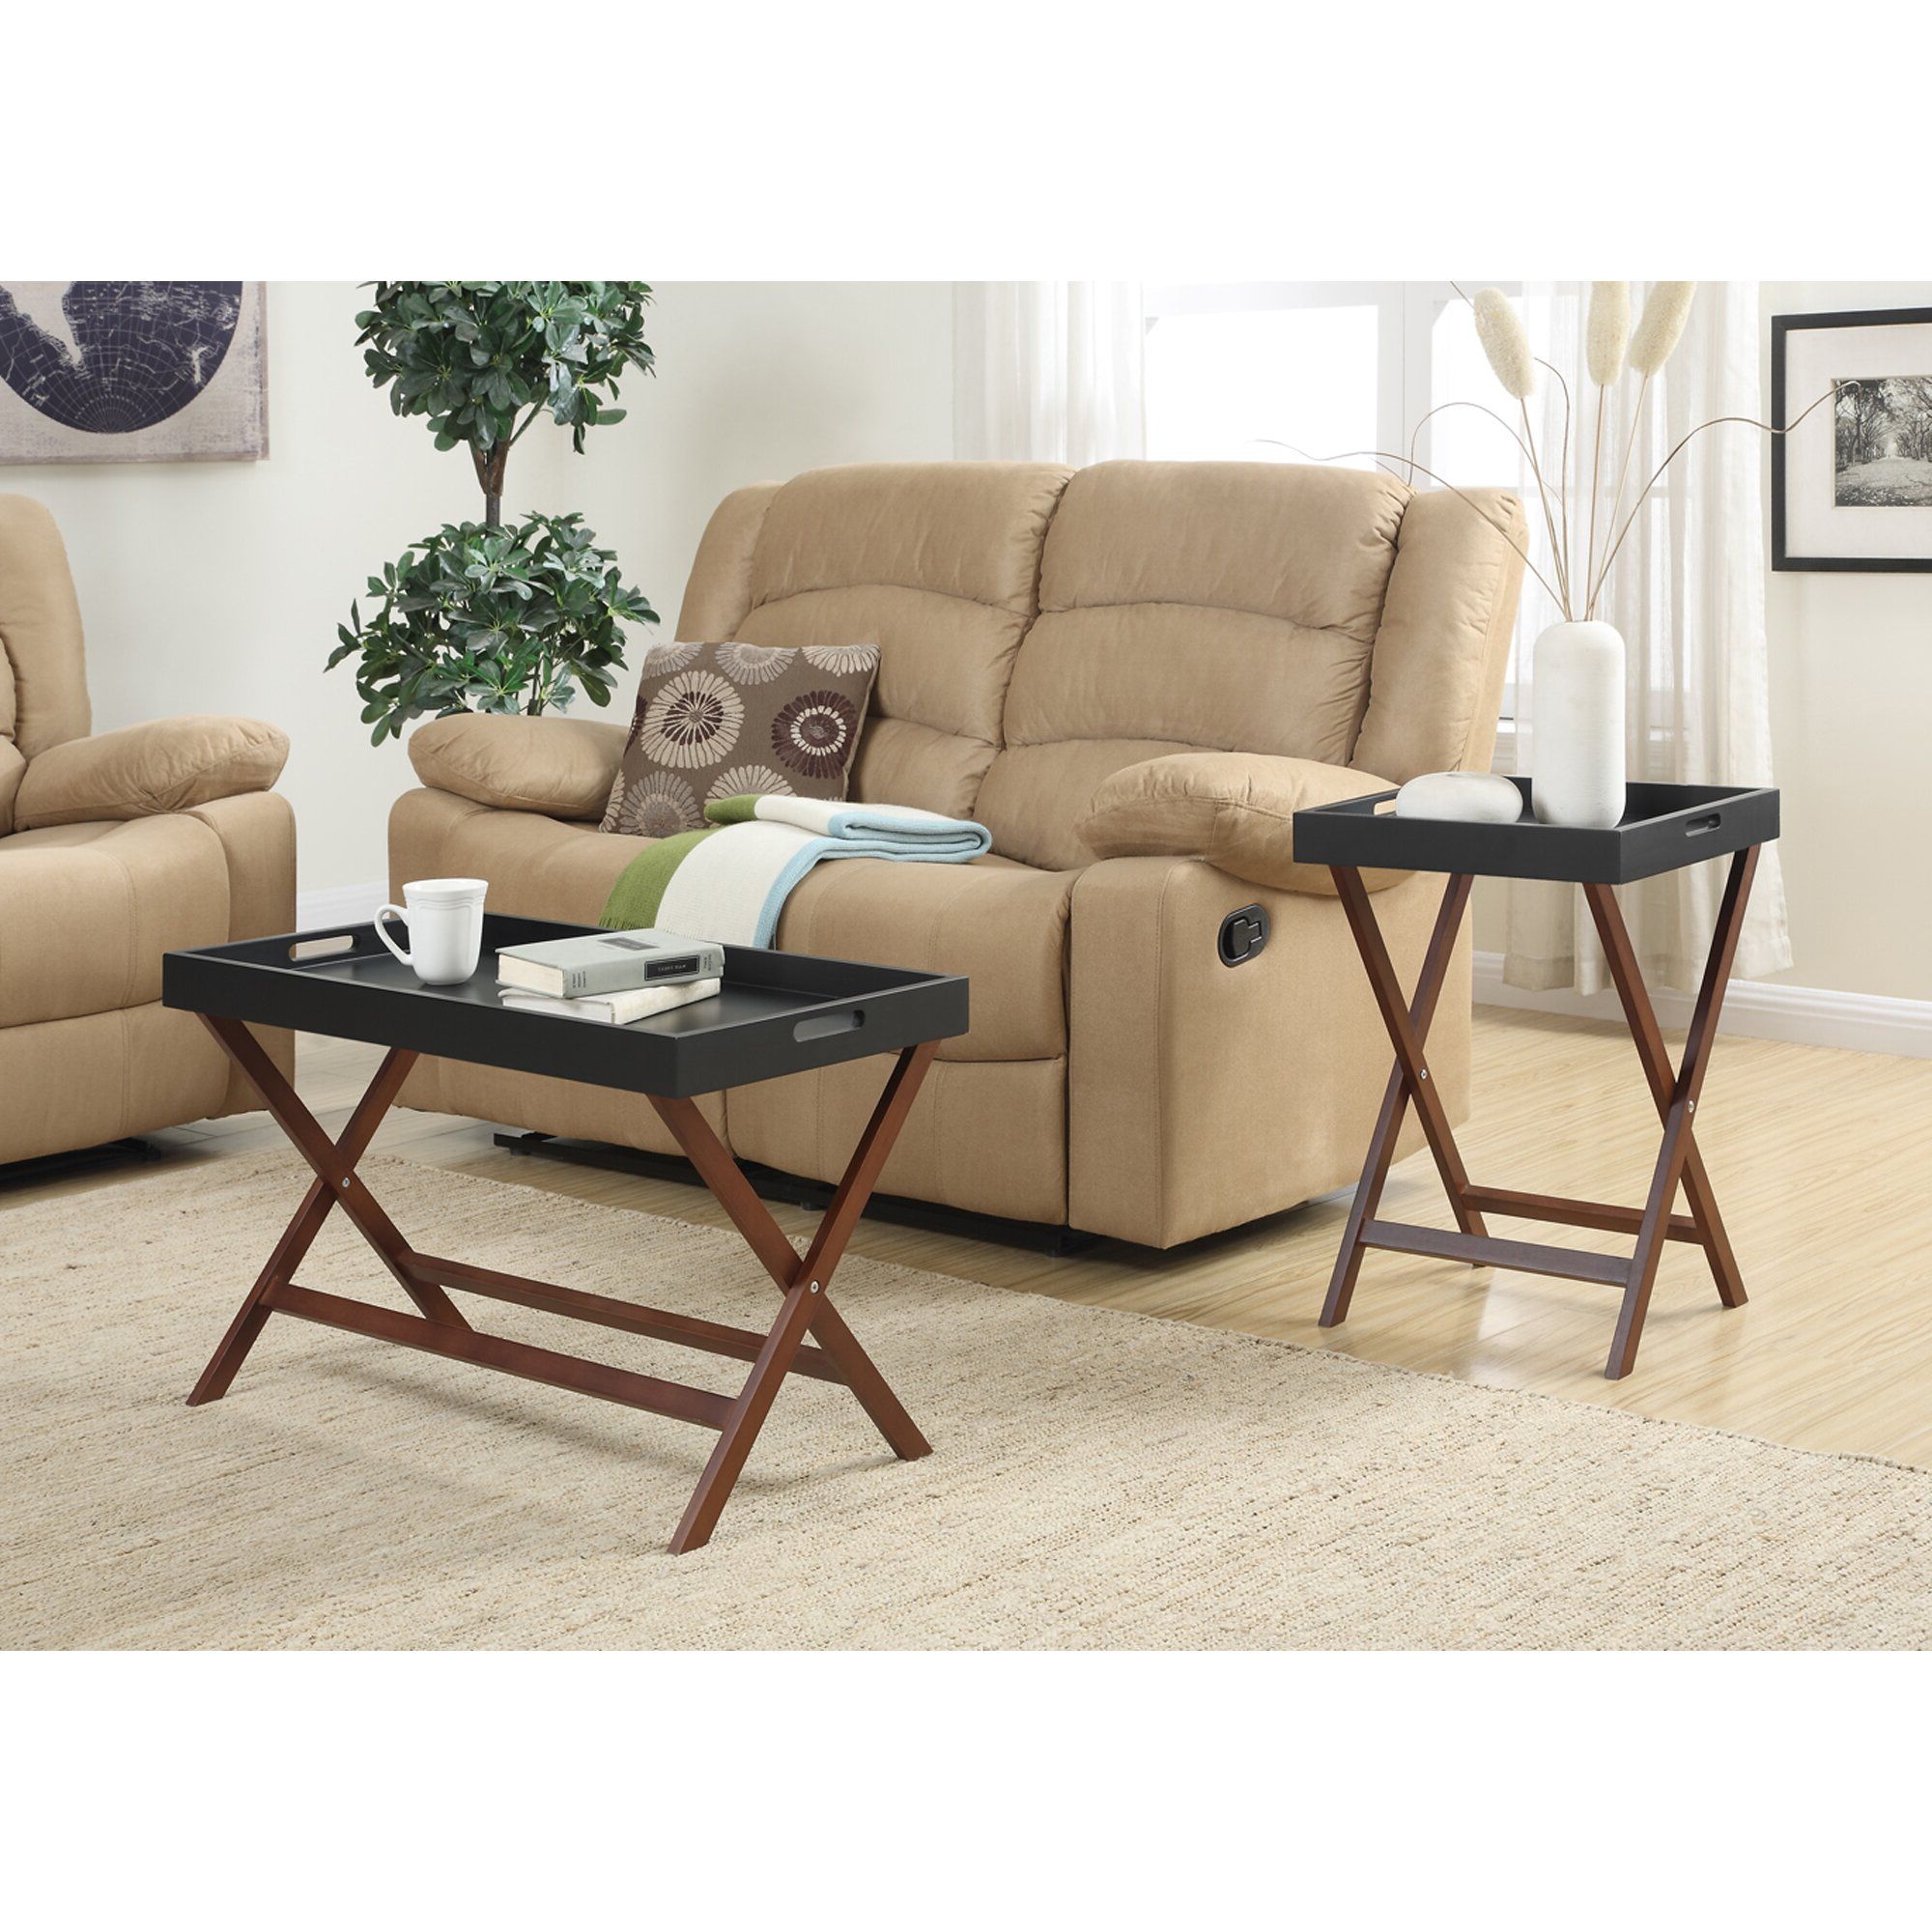 2019 Detachable Tray Coffee Tables Within Lockheart Coffee Table With Removable Tray (View 3 of 15)